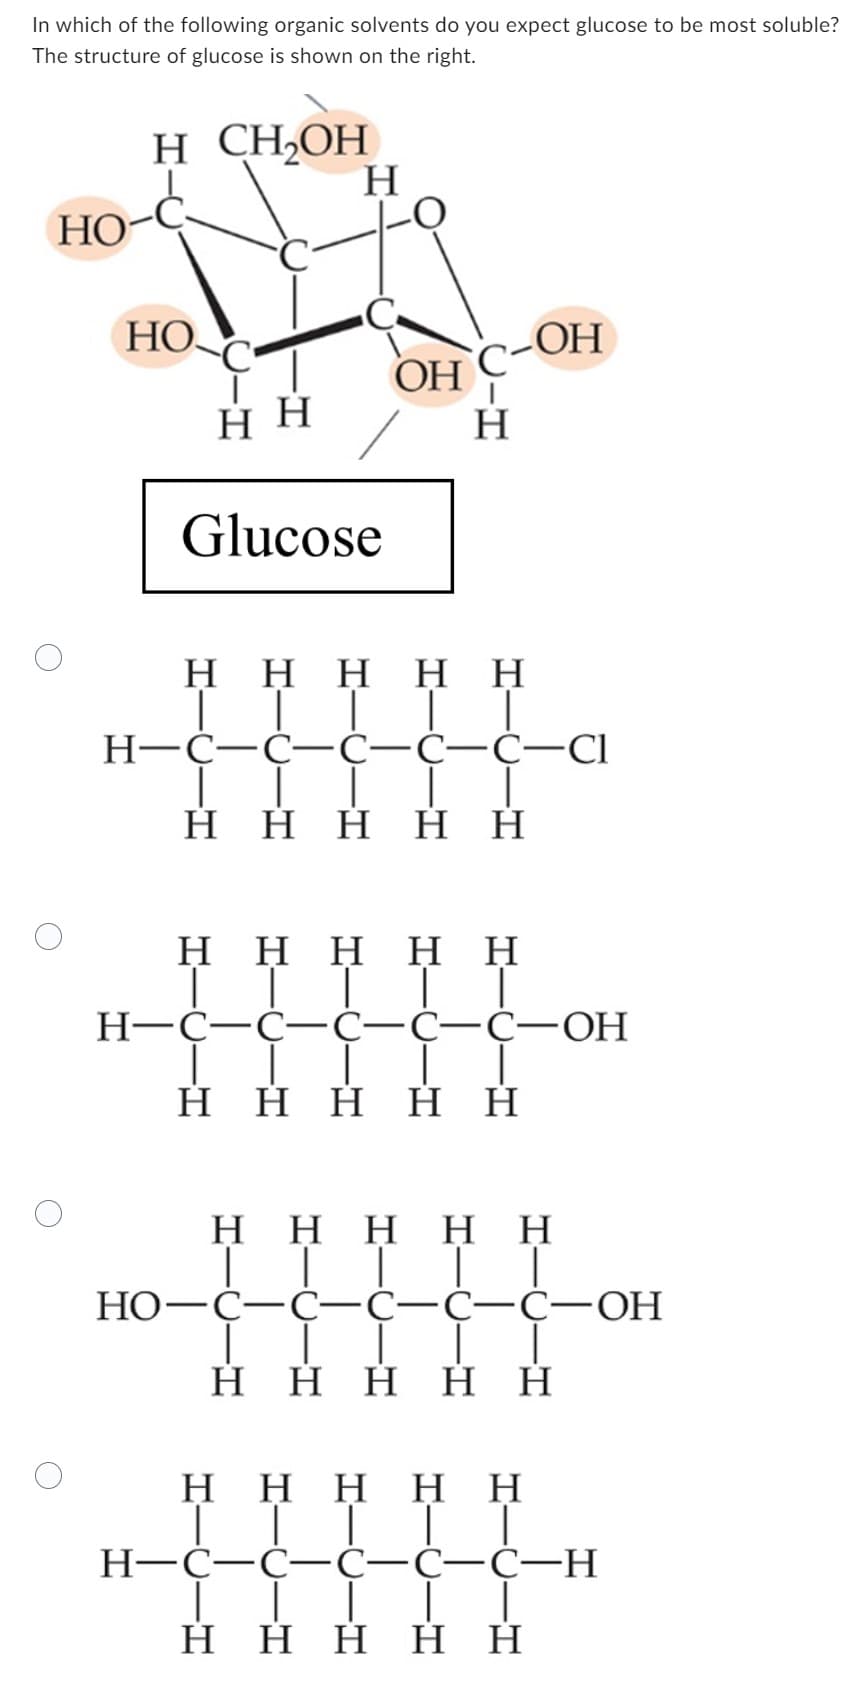 In which of the following organic solvents do you expect glucose to be most soluble?
The structure of glucose is shown on the right.
H CH₂OH
HO
HO.
Η Η
Η
Glucose
OH
Η
-OH
Η Η Η Η Η
ΤΤΙ
H=C=C=C=C=C-Cl
| |
Η Η Η Η Η
Η Η Η Η Η
ΤΙΙΤΤ
H=C=C=C=C=C-OH
Η Η Η Η Η
H Η Η Η Η
TTTTT
HO-C=C=C=C=C-OH
1
Η Η Η Η Η
Η Η Η Η Η
││││ |
H=C=C=C=C=C-H
Η Η Η Η Η